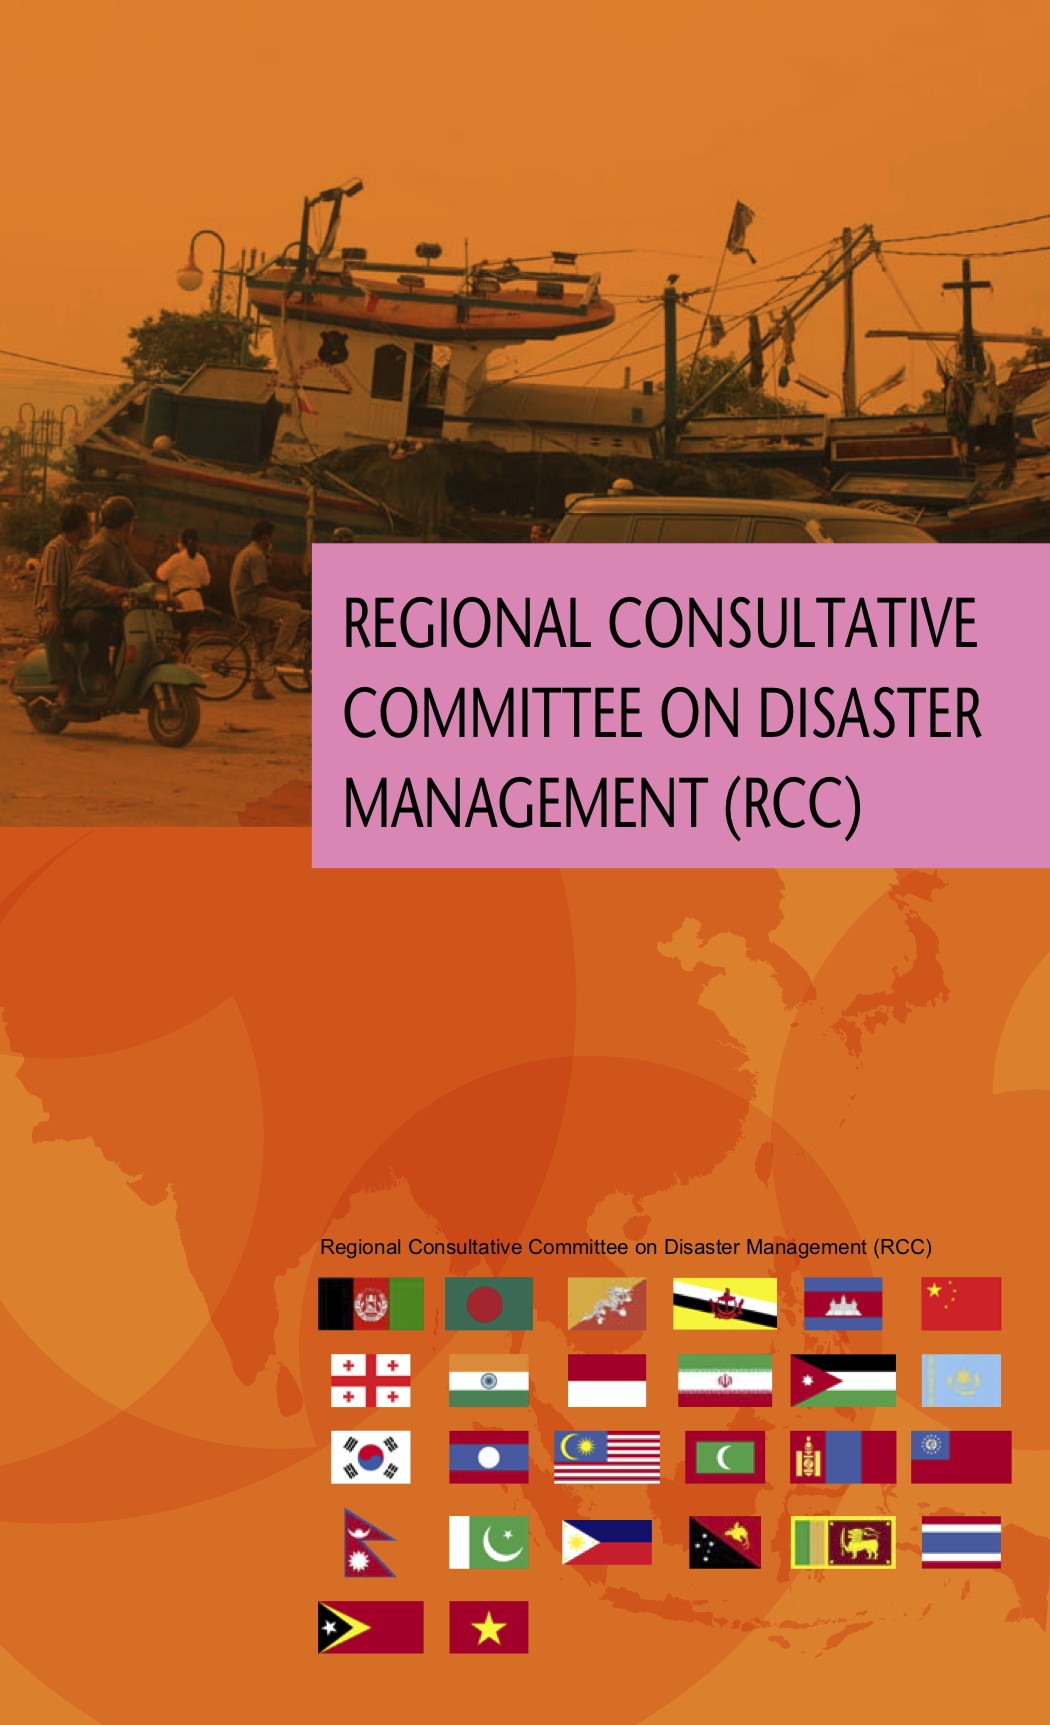 Regional Consultative Committee on Disaster Management (RCC)